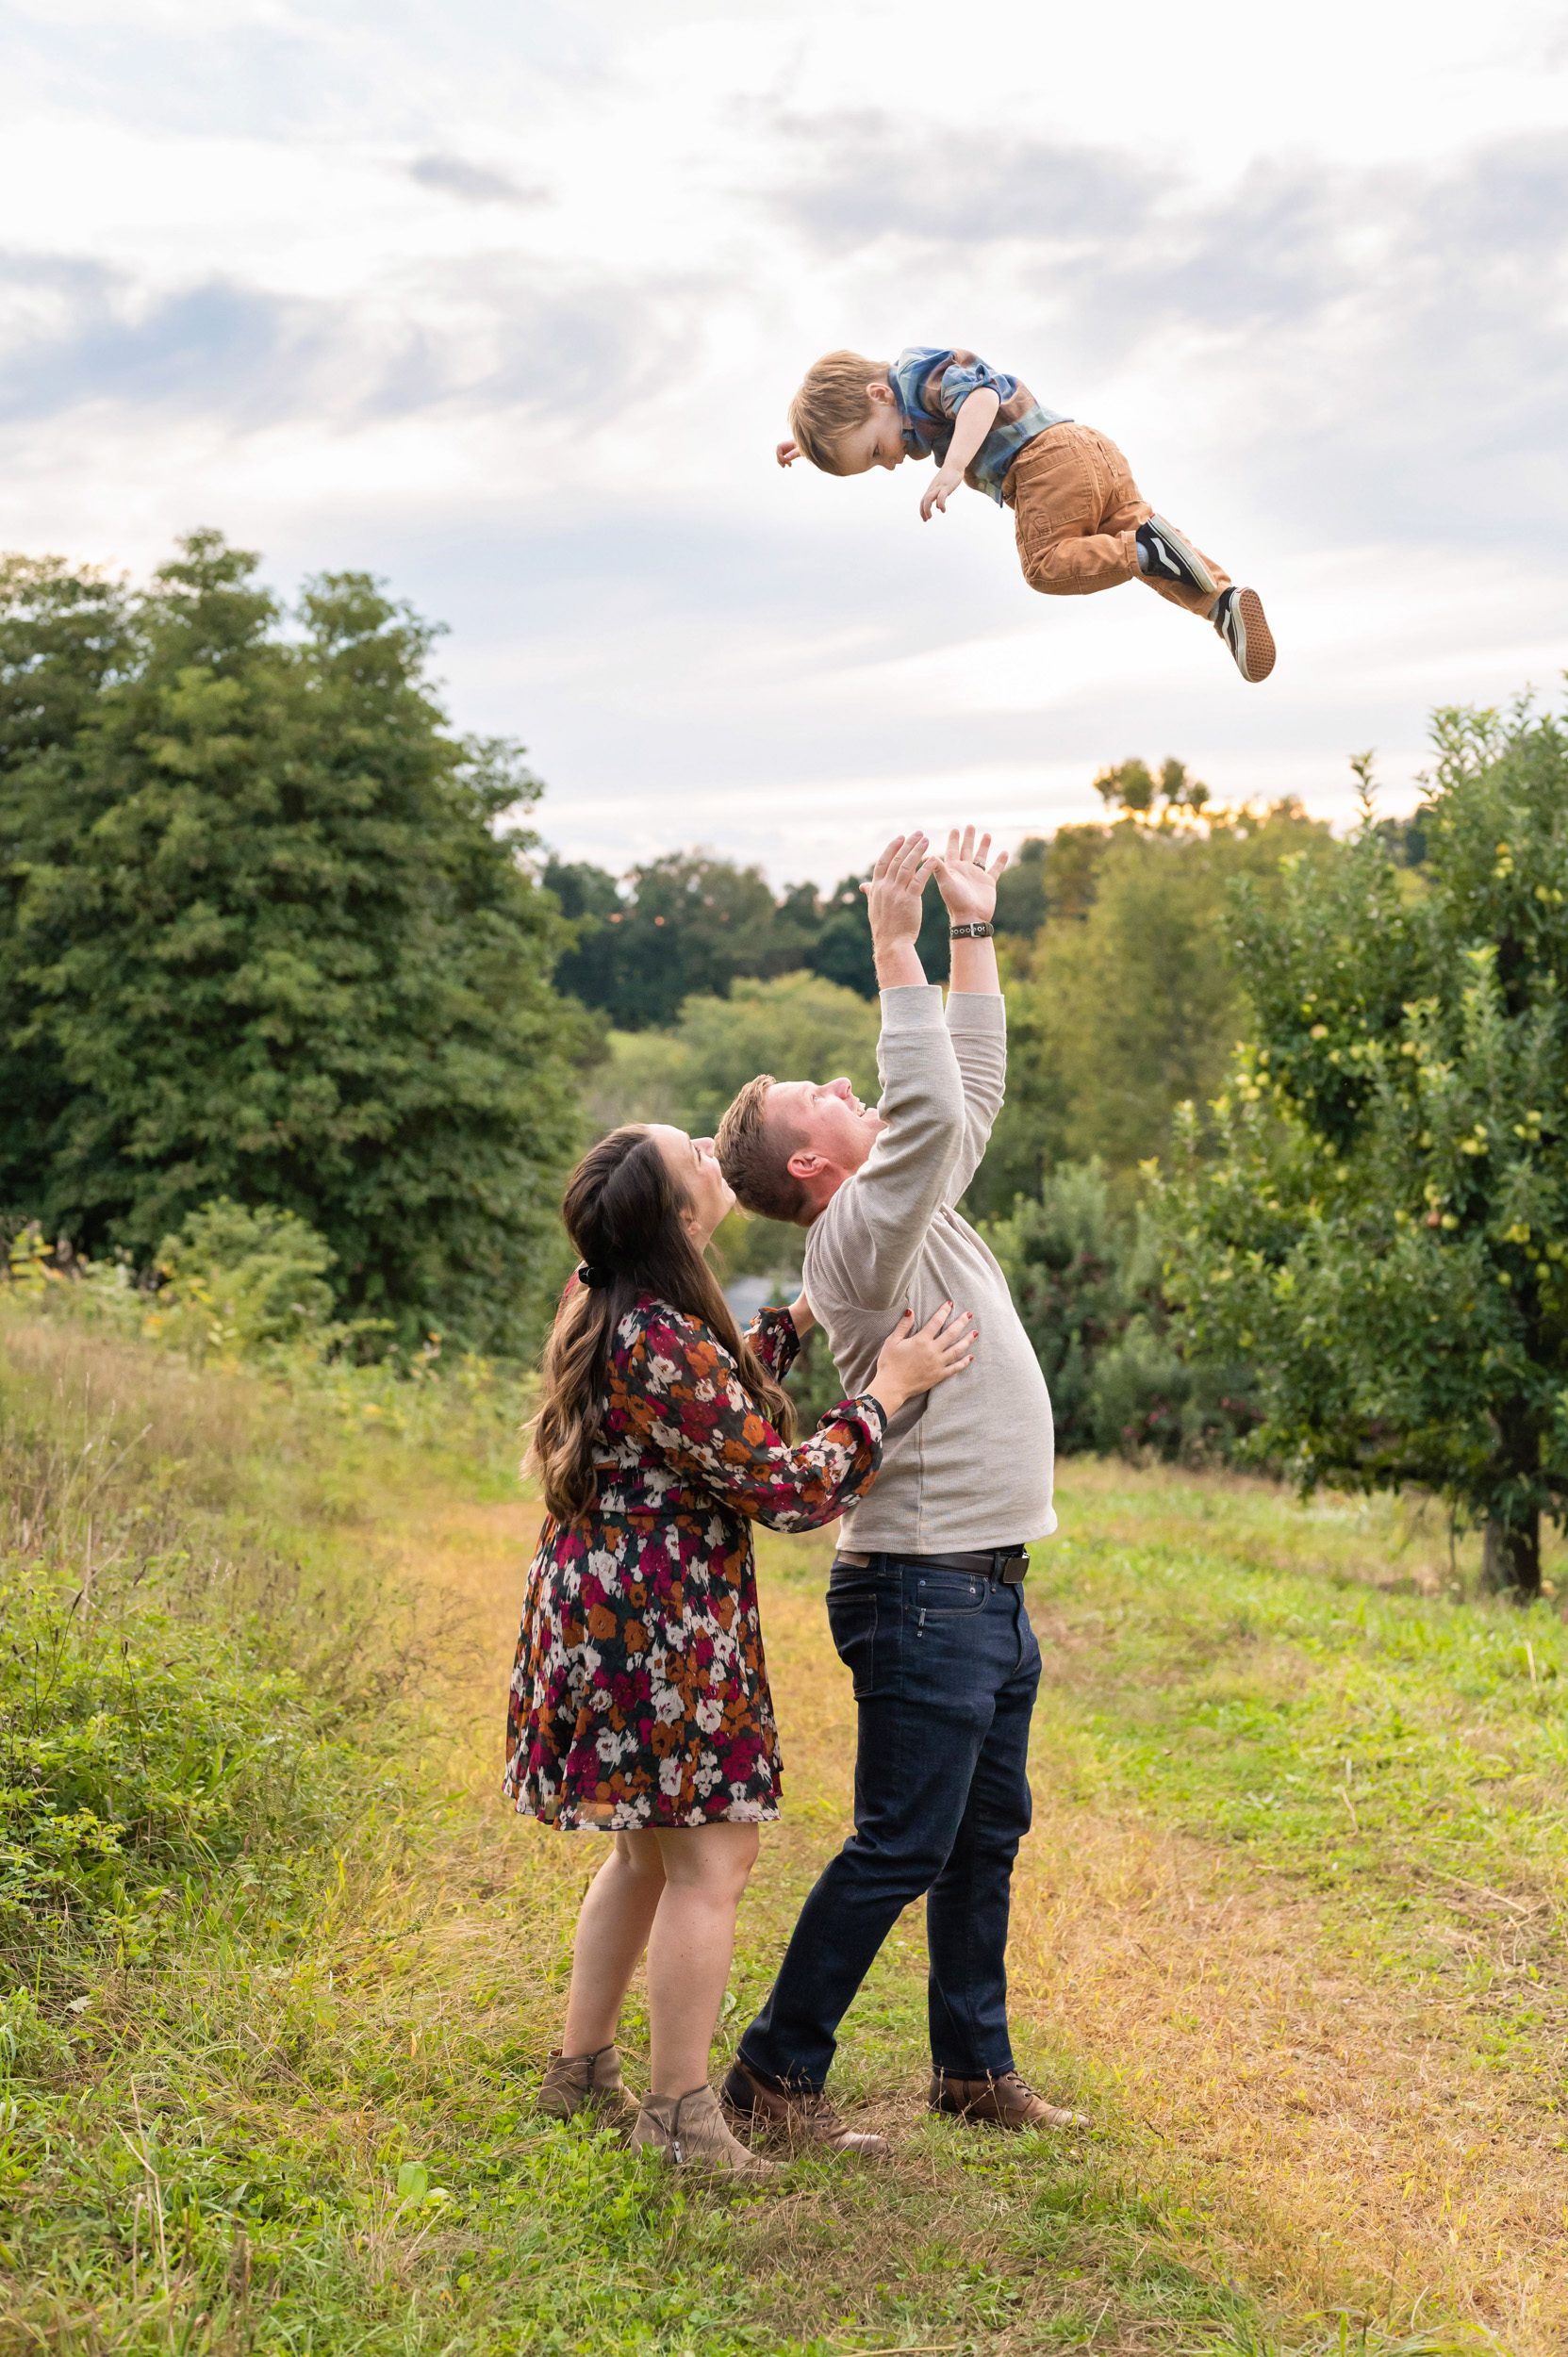 dad throwing his young son high in the air while mom hugs dad from behind during a family photoshoot